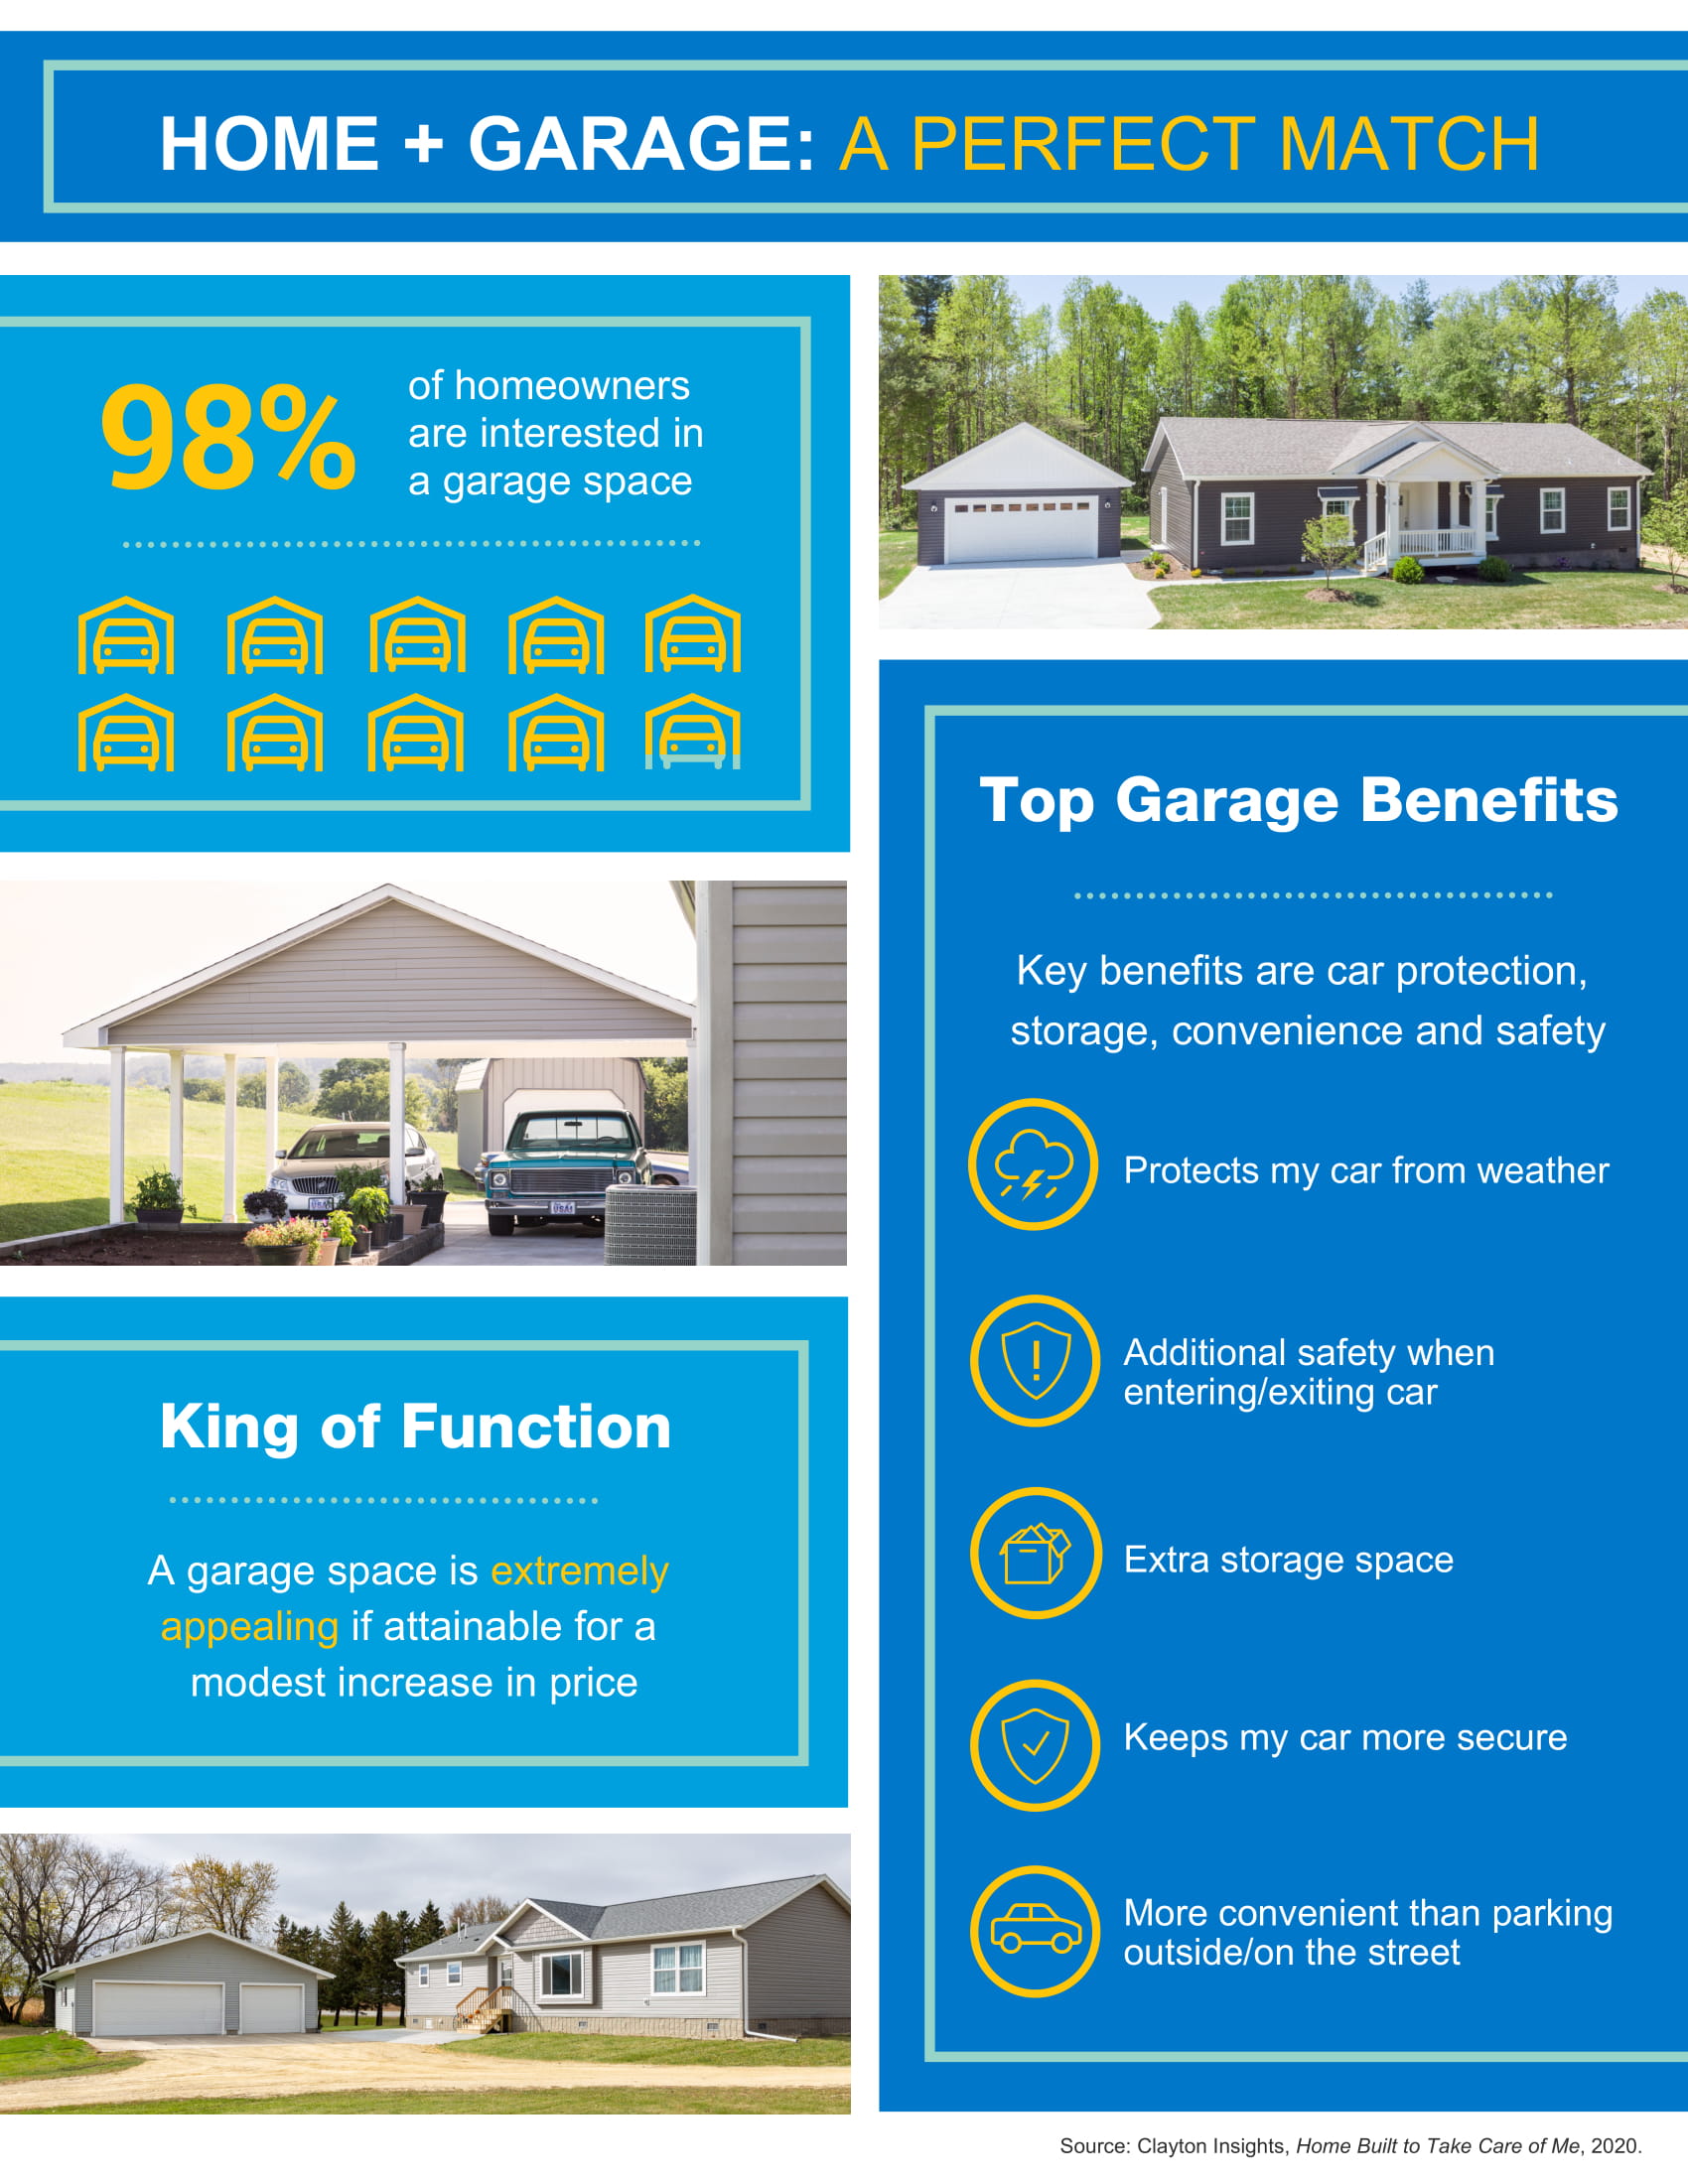 A survey by Clayton’s consumer insights team shows 98% of potential homebuyers surveyed say they are interested in a garage space.